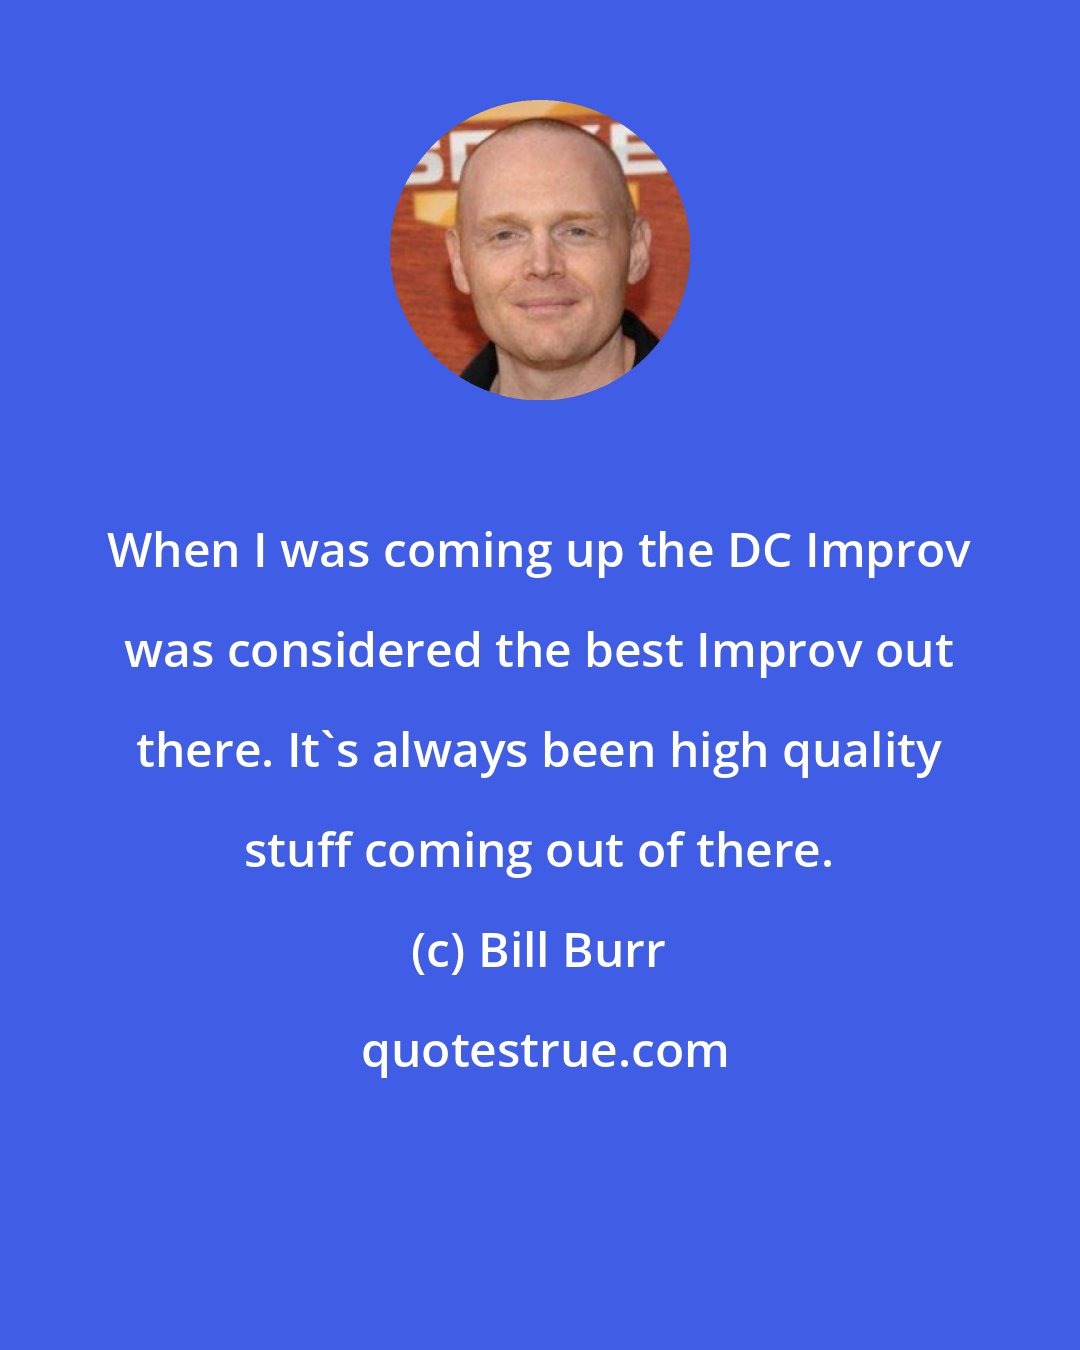 Bill Burr: When I was coming up the DC Improv was considered the best Improv out there. It's always been high quality stuff coming out of there.